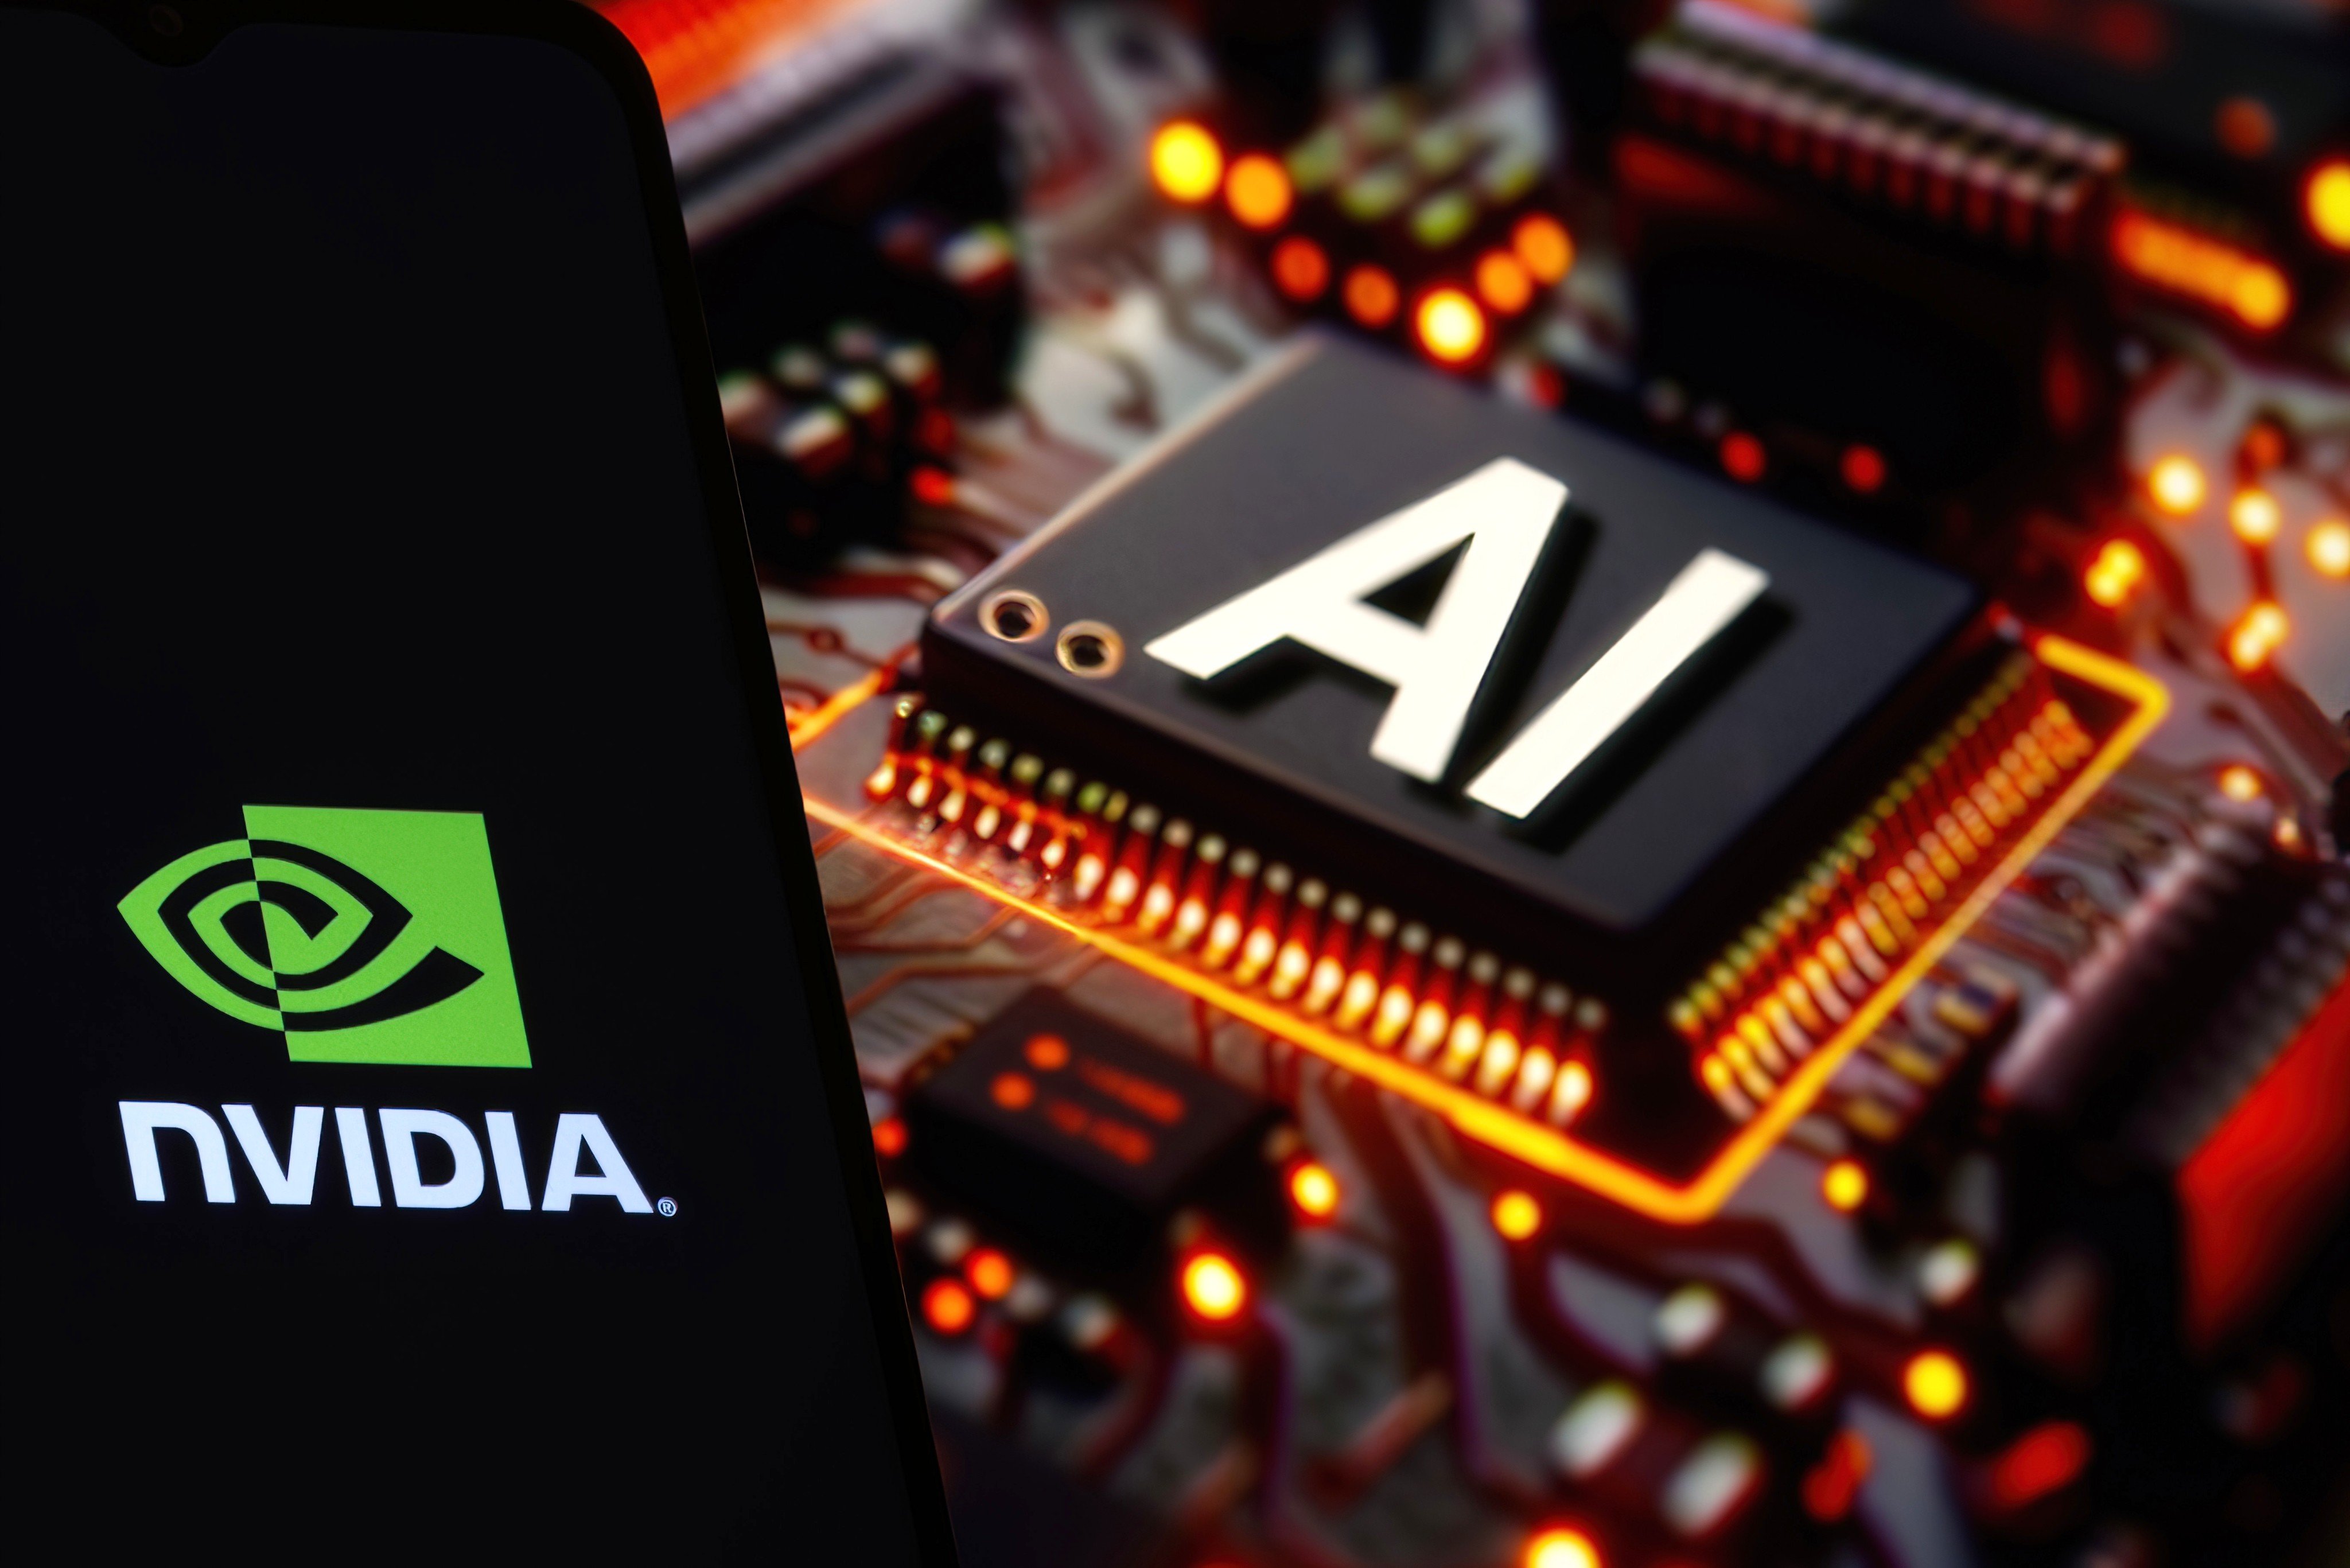 Nvidia said systems built with its graphics processing units – chips that are in demand for artificial intelligence projects – and resold by third parties must comply with US export restrictions. Photo: Shutterstock